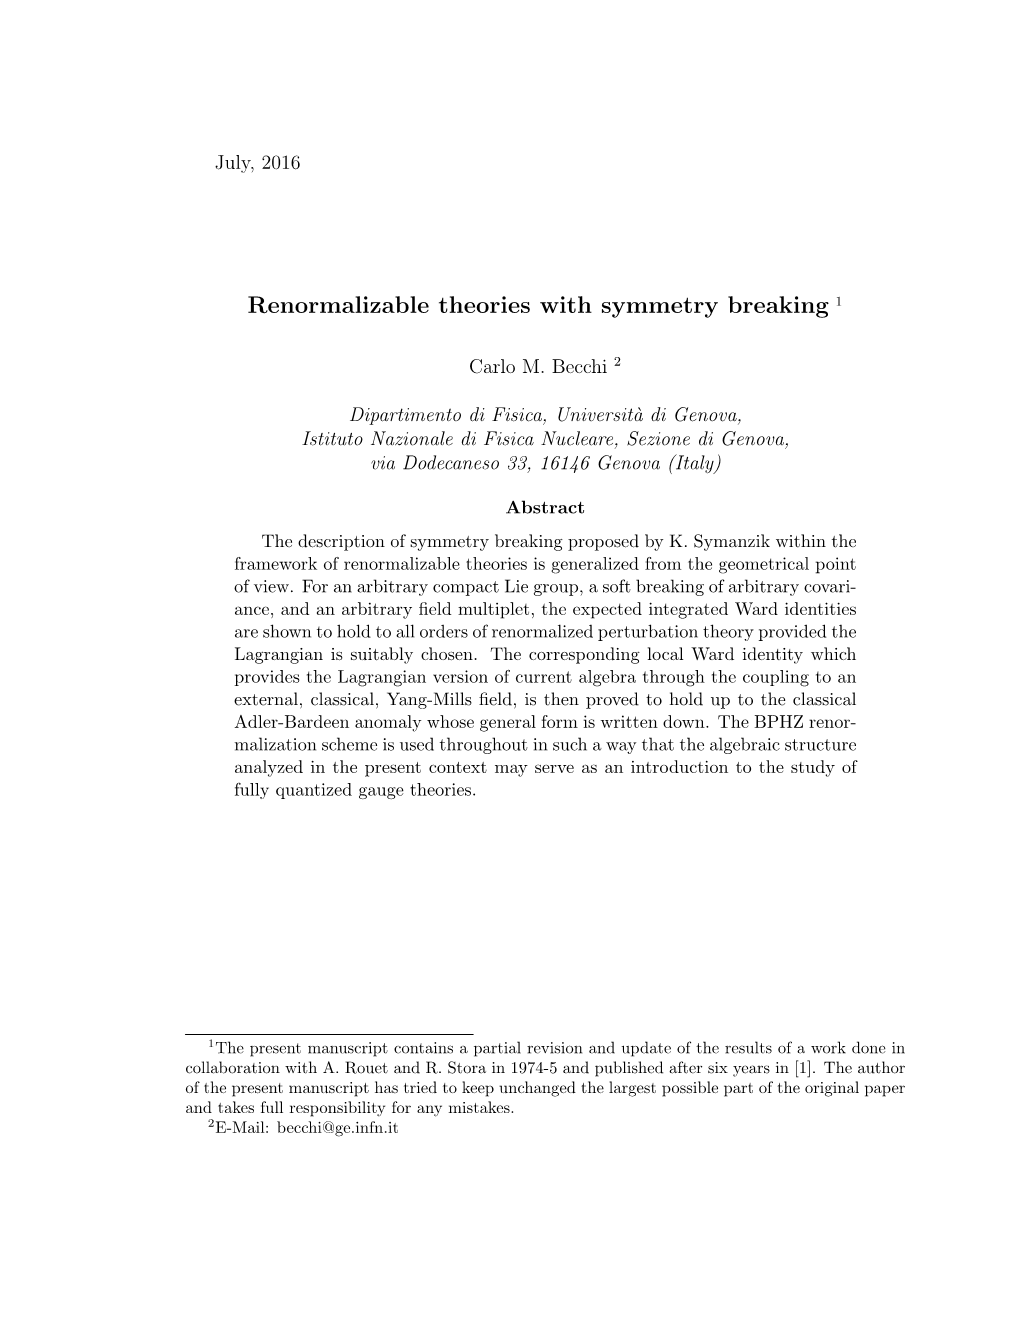 Renormalizable Theories with Symmetry Breaking 1